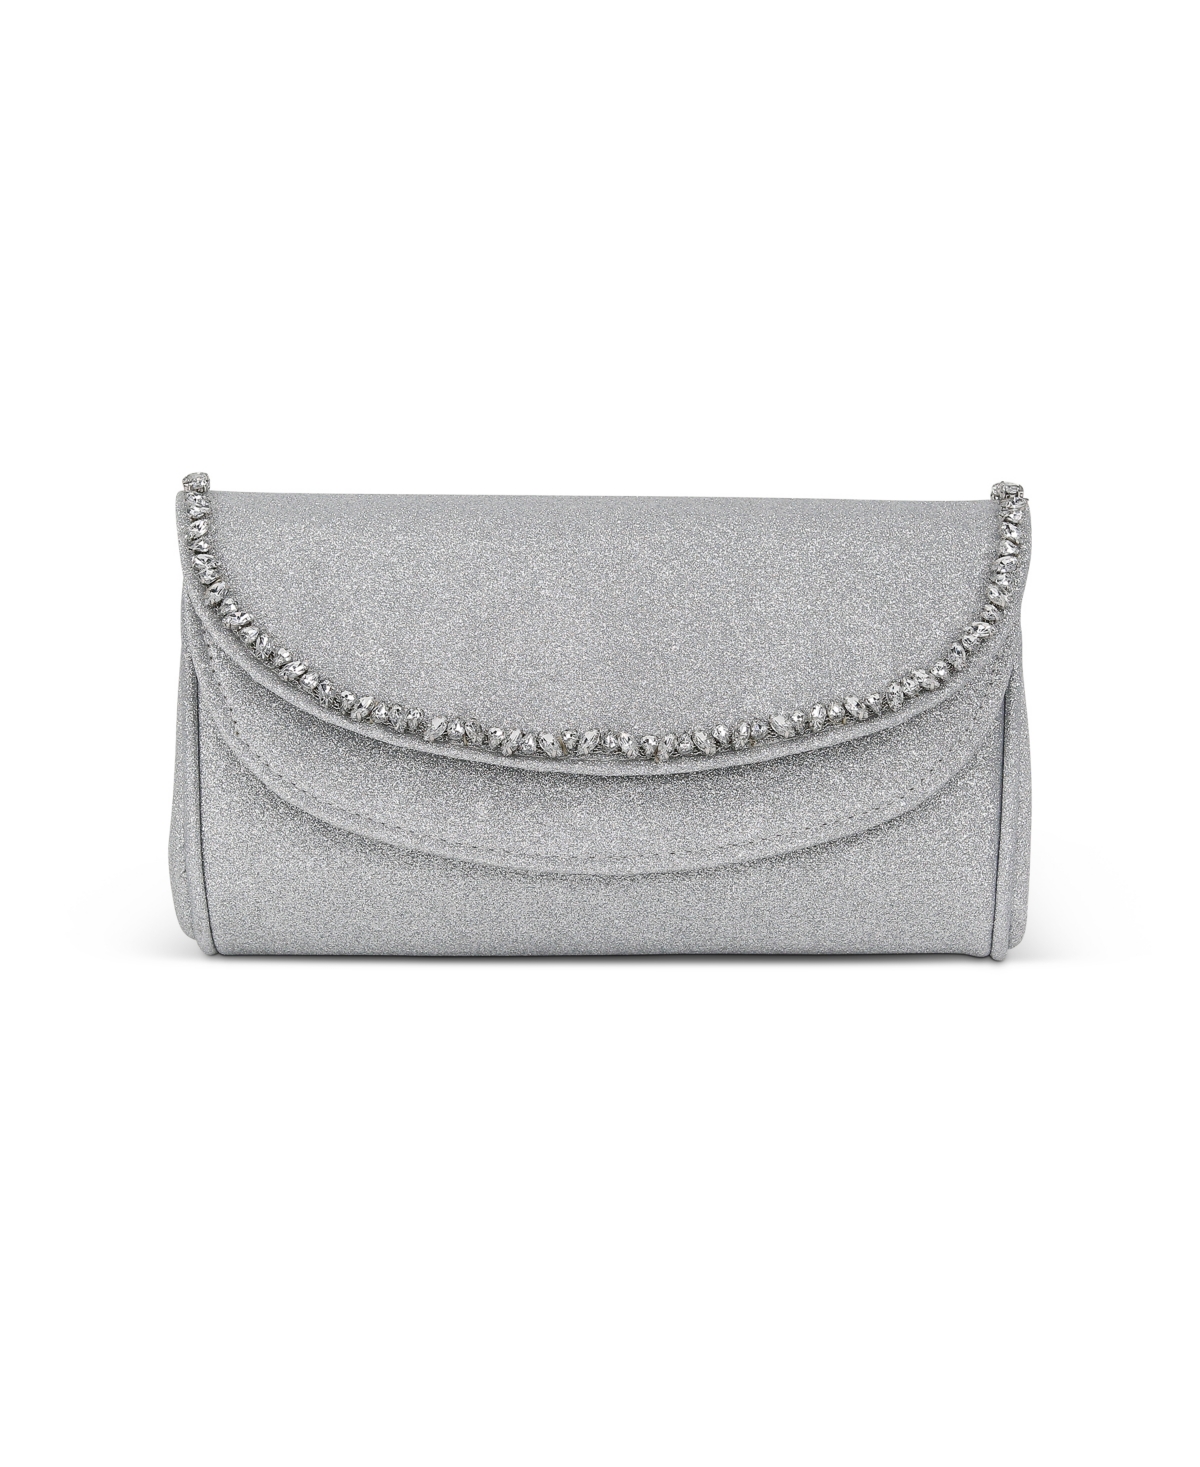 Woman's Talia Double Flap Clutch with Crystal Necklace - Silver